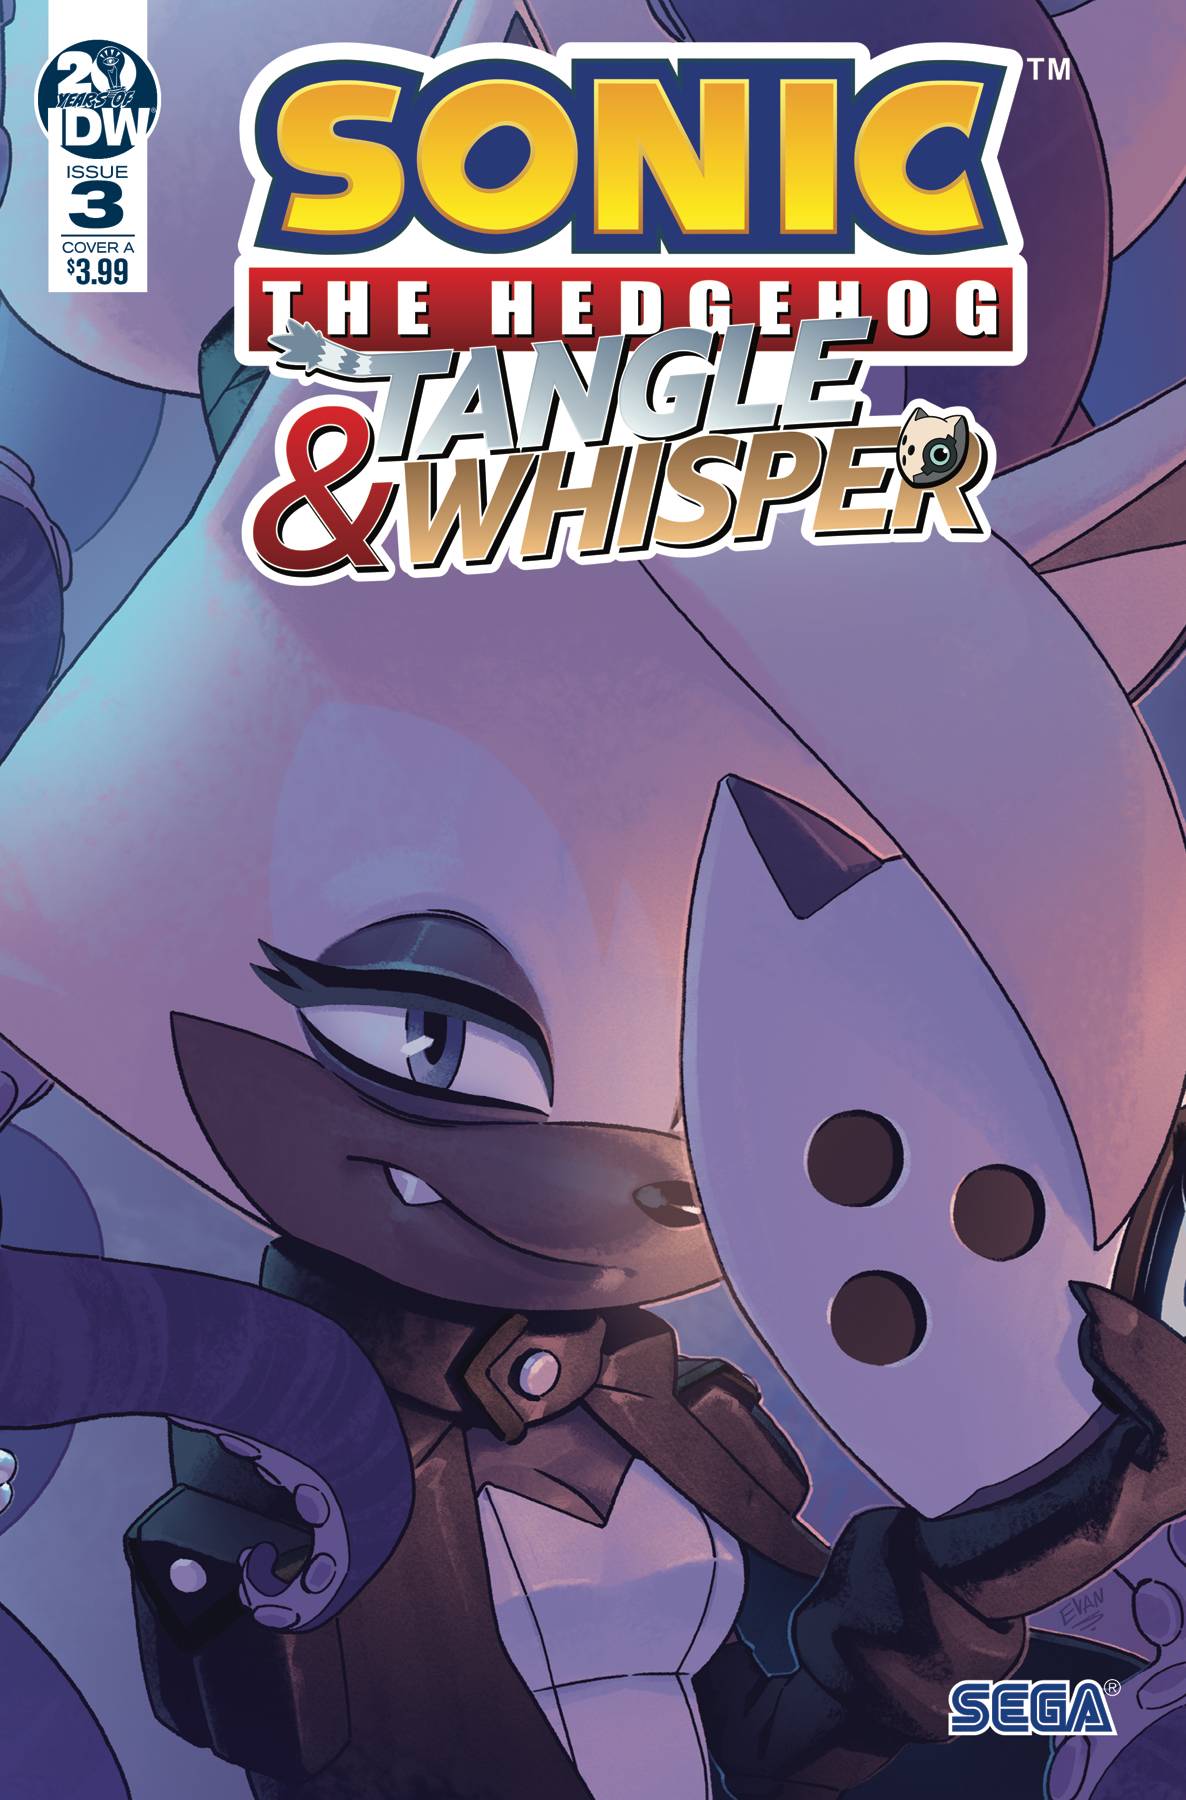 Sonic the Hedgehog Tangle & Whisper #3 Cover A Stanley (Of 4)